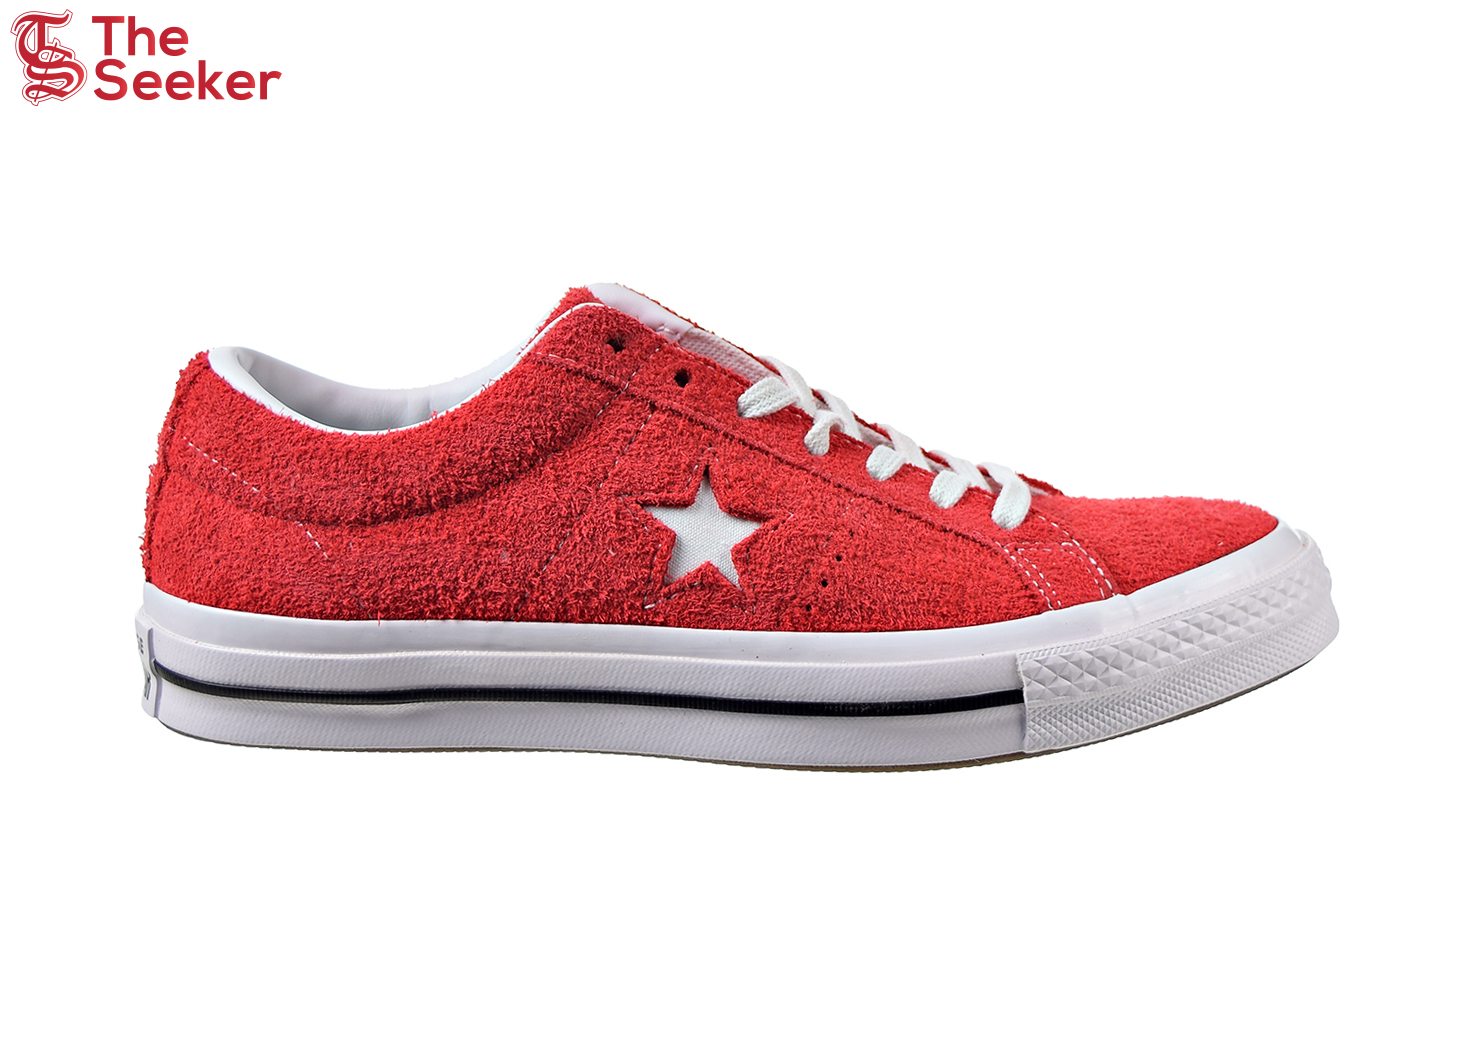 Converse One Star Ox Suede Red